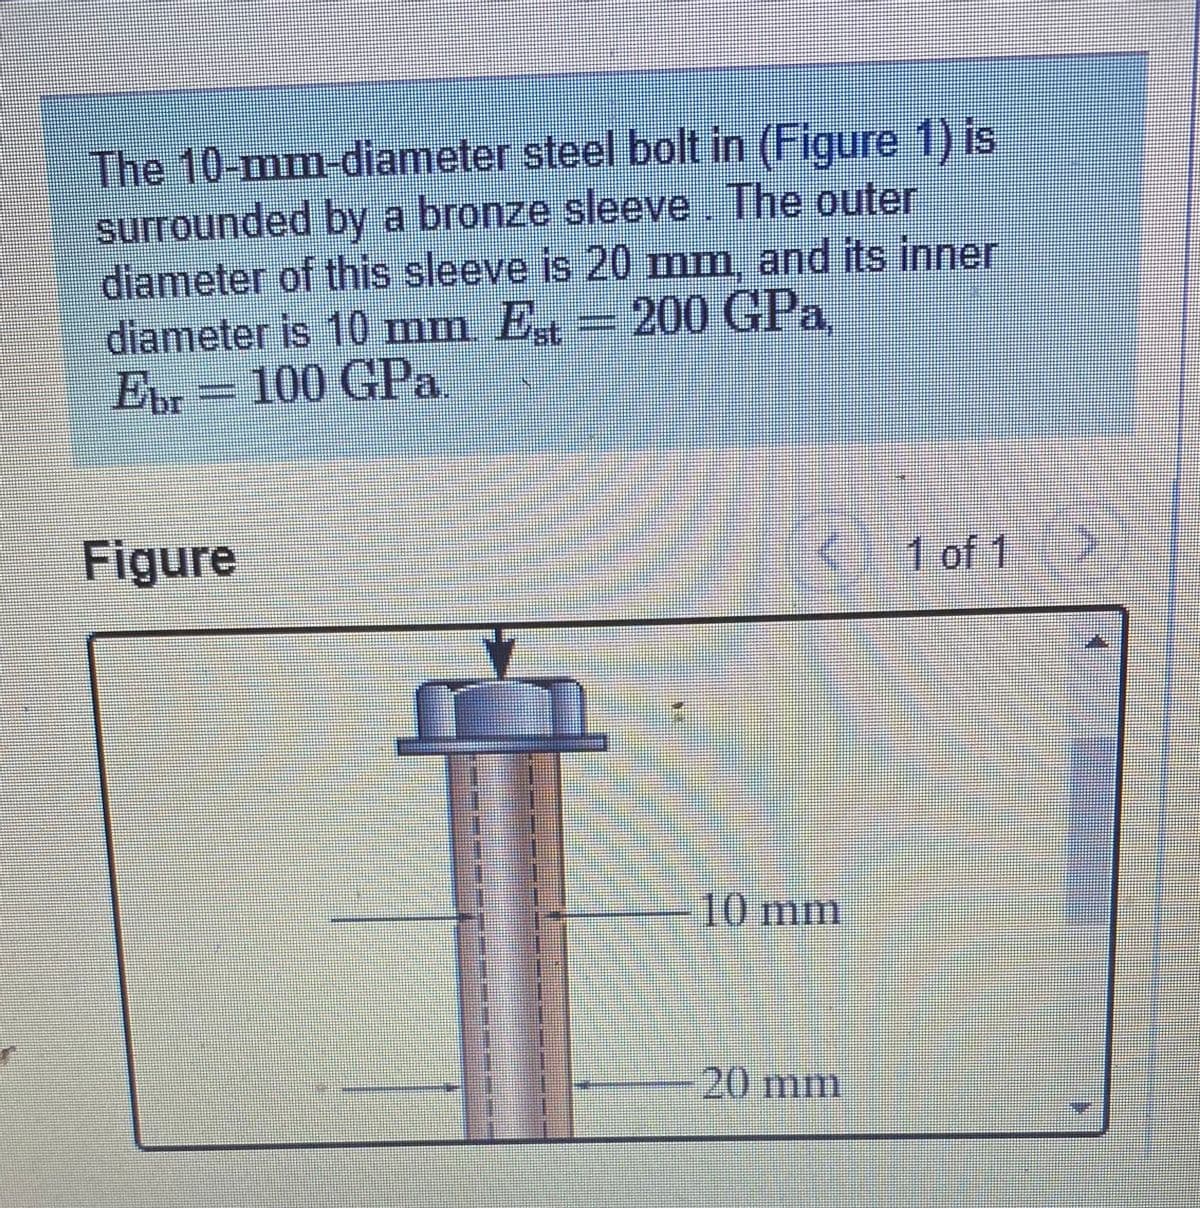 The 10-mm-diameter steel bolt in (Figure 1) is
surrounded by a bronze sleeve. The outer
diameter of this sleeve is 20 mm, and its inner
diameter is 10 mm E, =200 GPa,
Er-100 GPa
st.
Figure
K1 of 1
-10mm
20 mm
